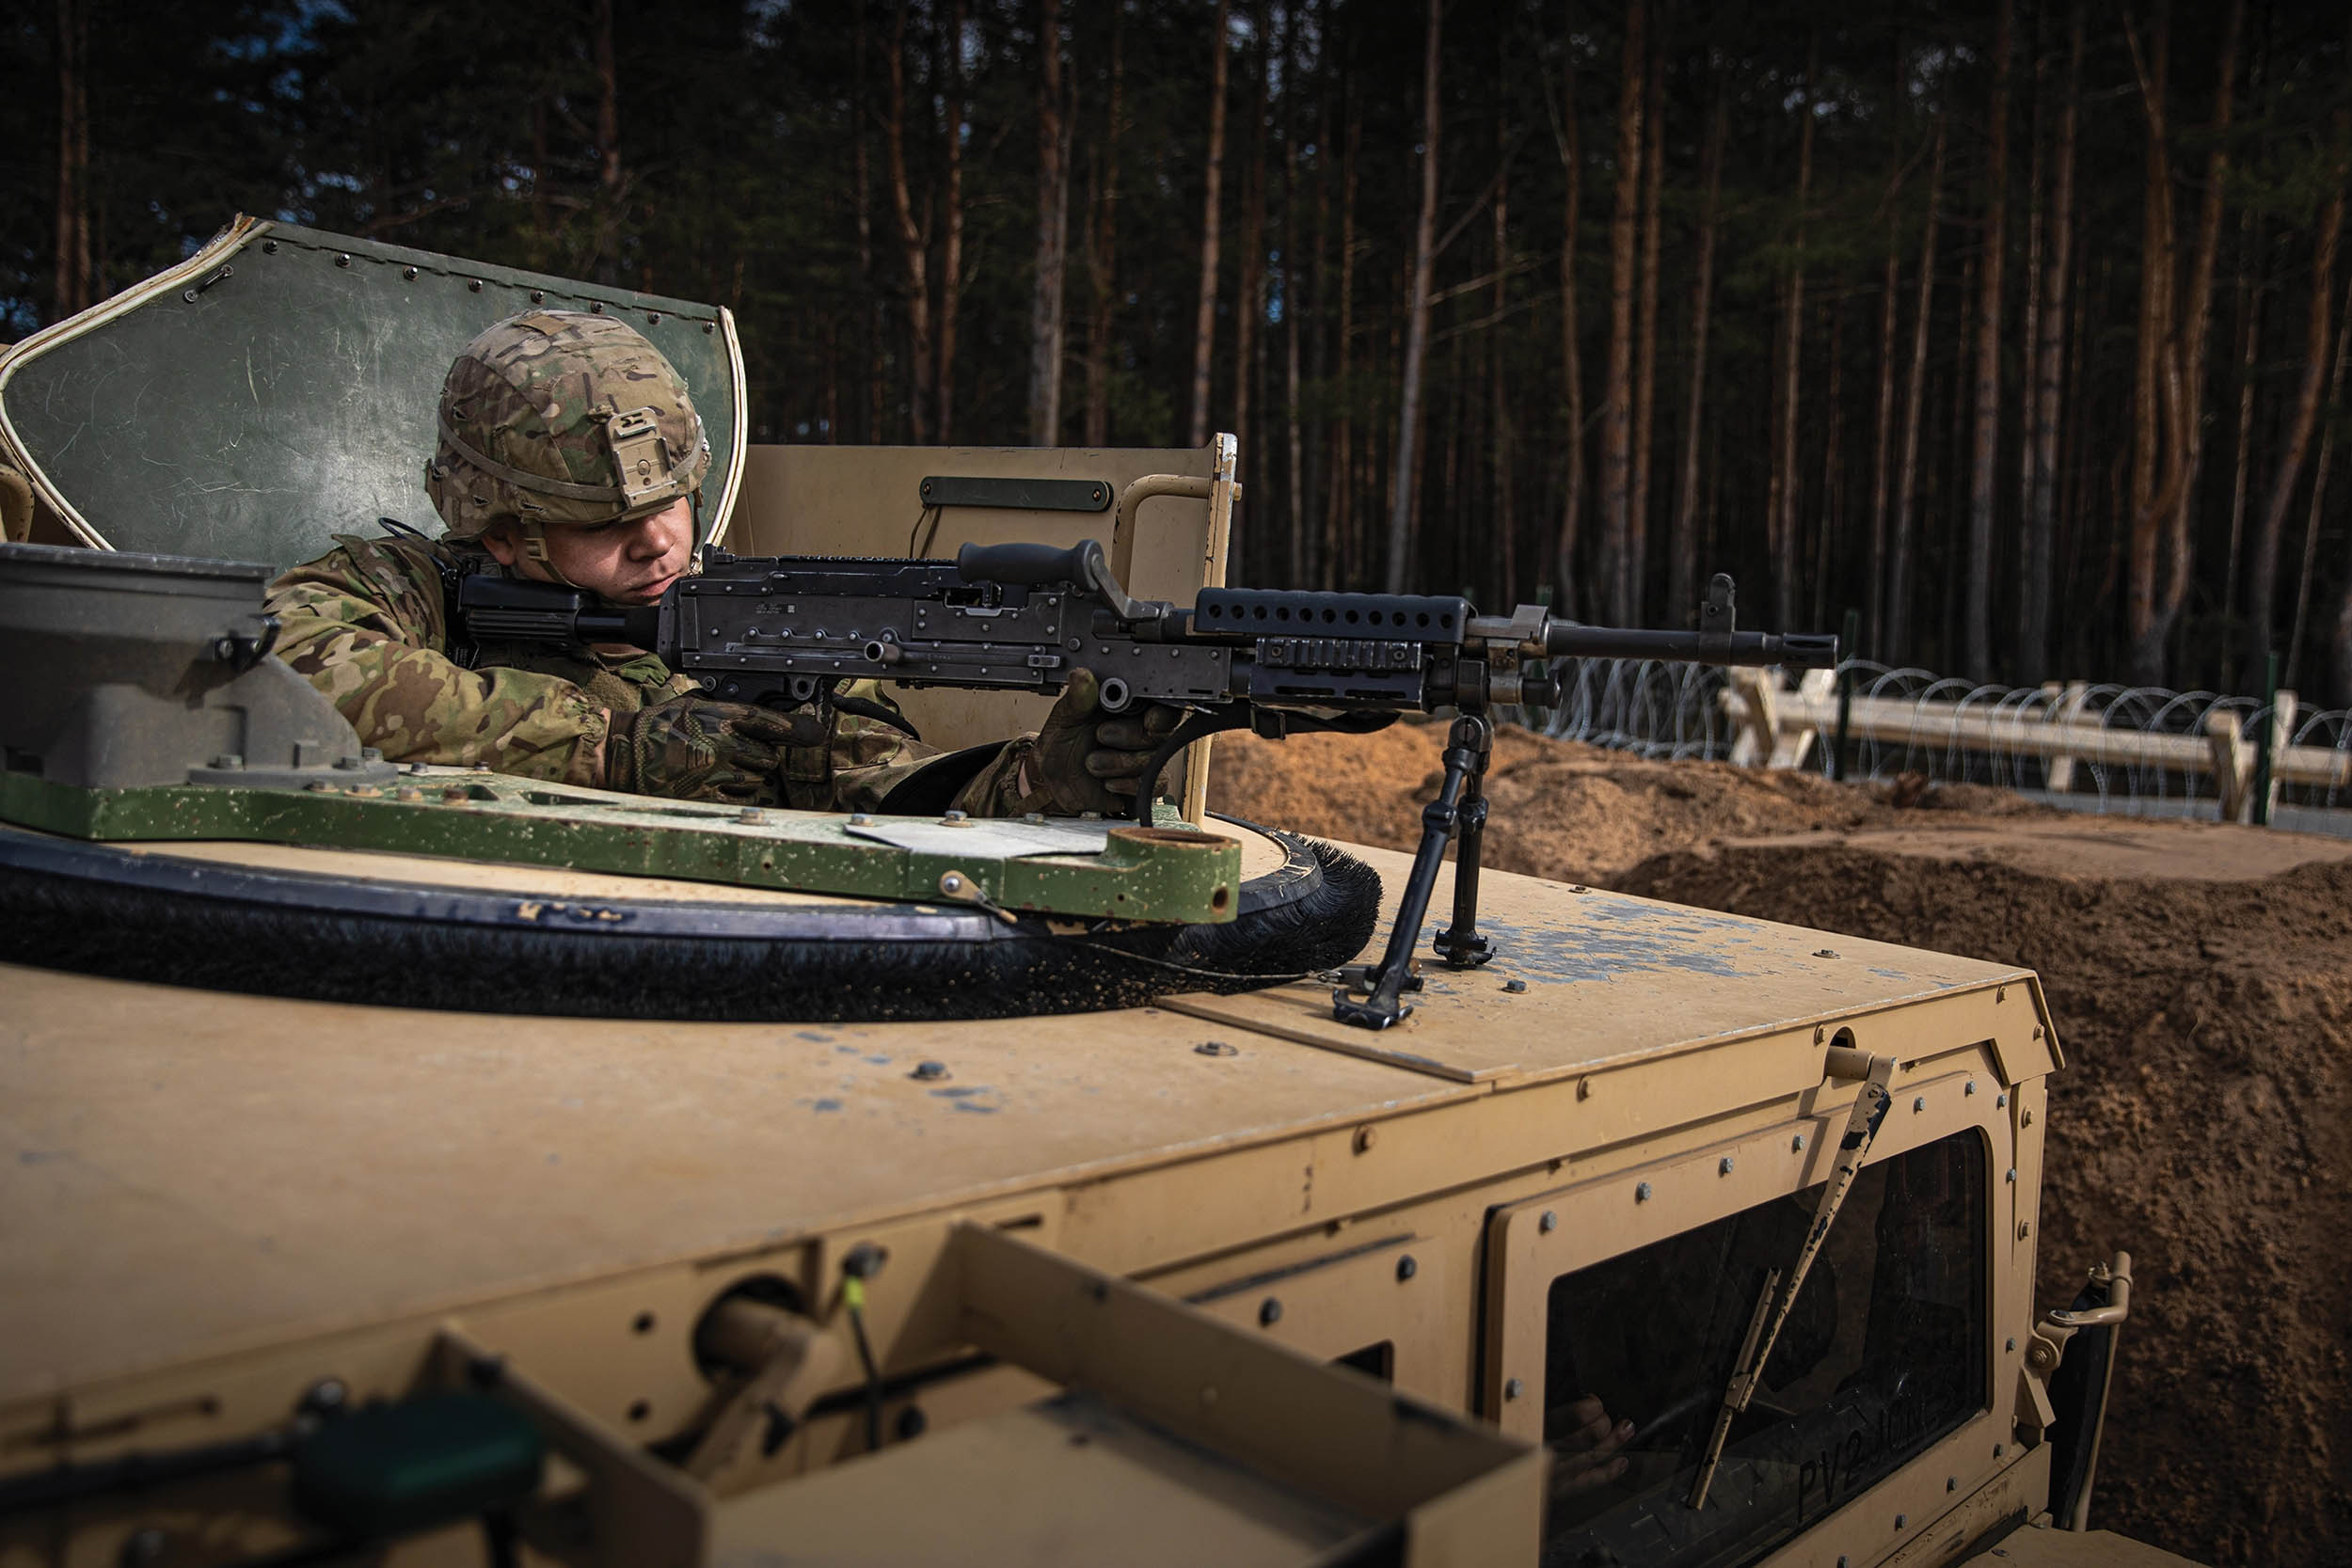 Soldier assigned to Force Protection Platoon, 3rd Battalion, 66th Armored Regiment, 1st Armored Brigade Combat Team, 1st Infantry Division, maintains perimeter security from top of Humvee during gate runner exercise conducted at Camp Herkus, Lithuania, April 13, 2022 (U.S. Army National Guard/Agustín Montañez)